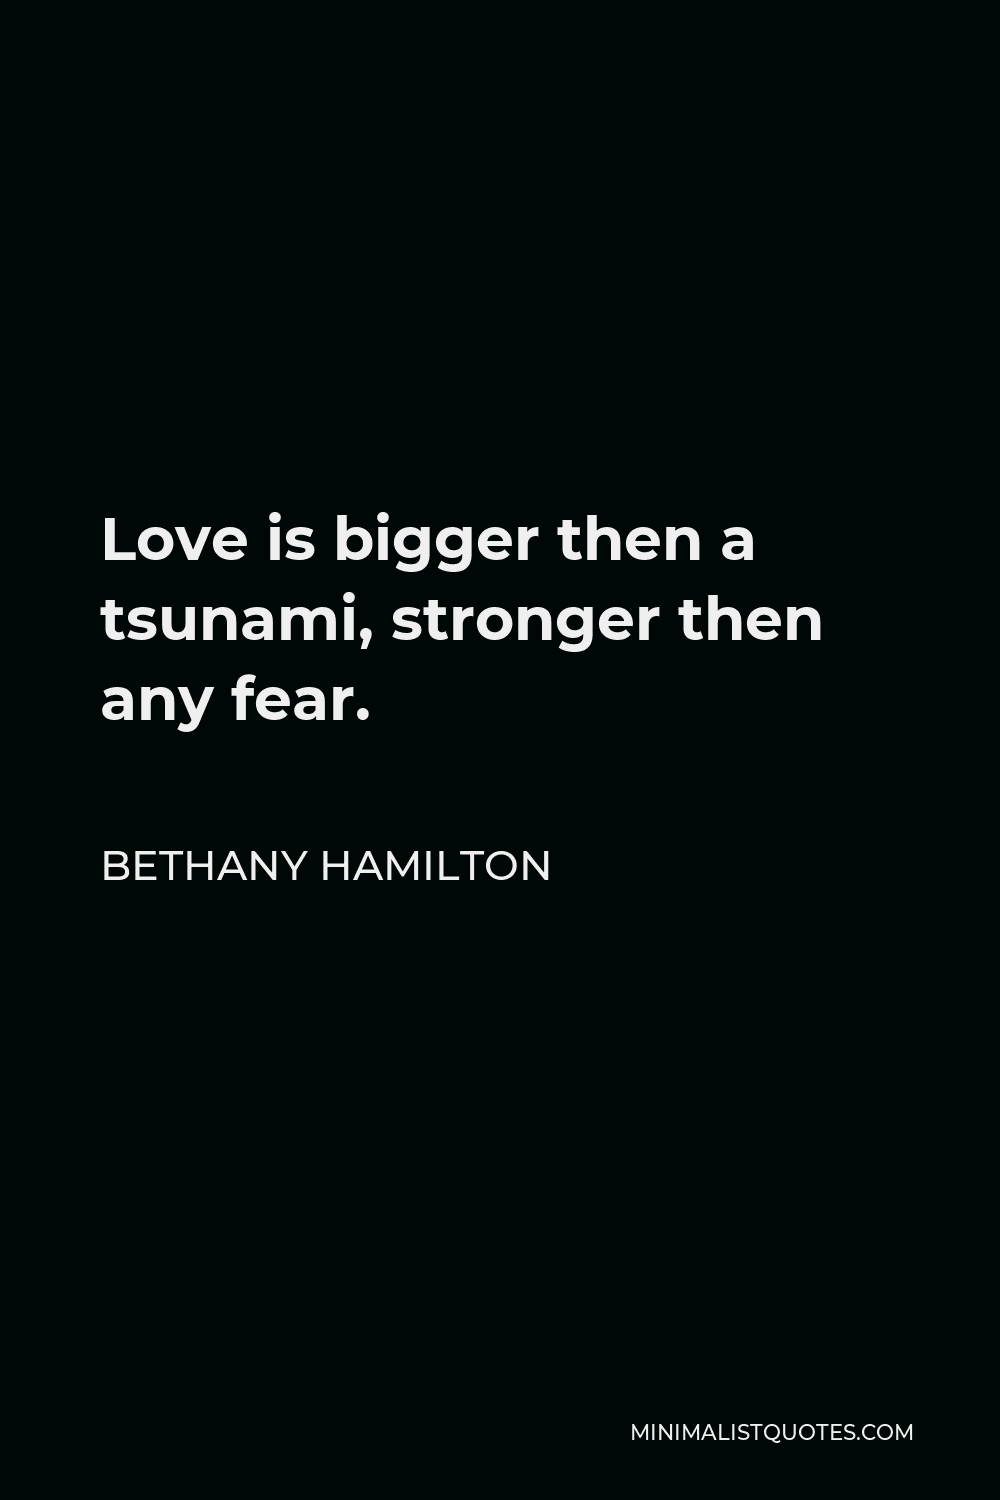 Bethany Hamilton Quote - Love is bigger then a tsunami, stronger then any fear.